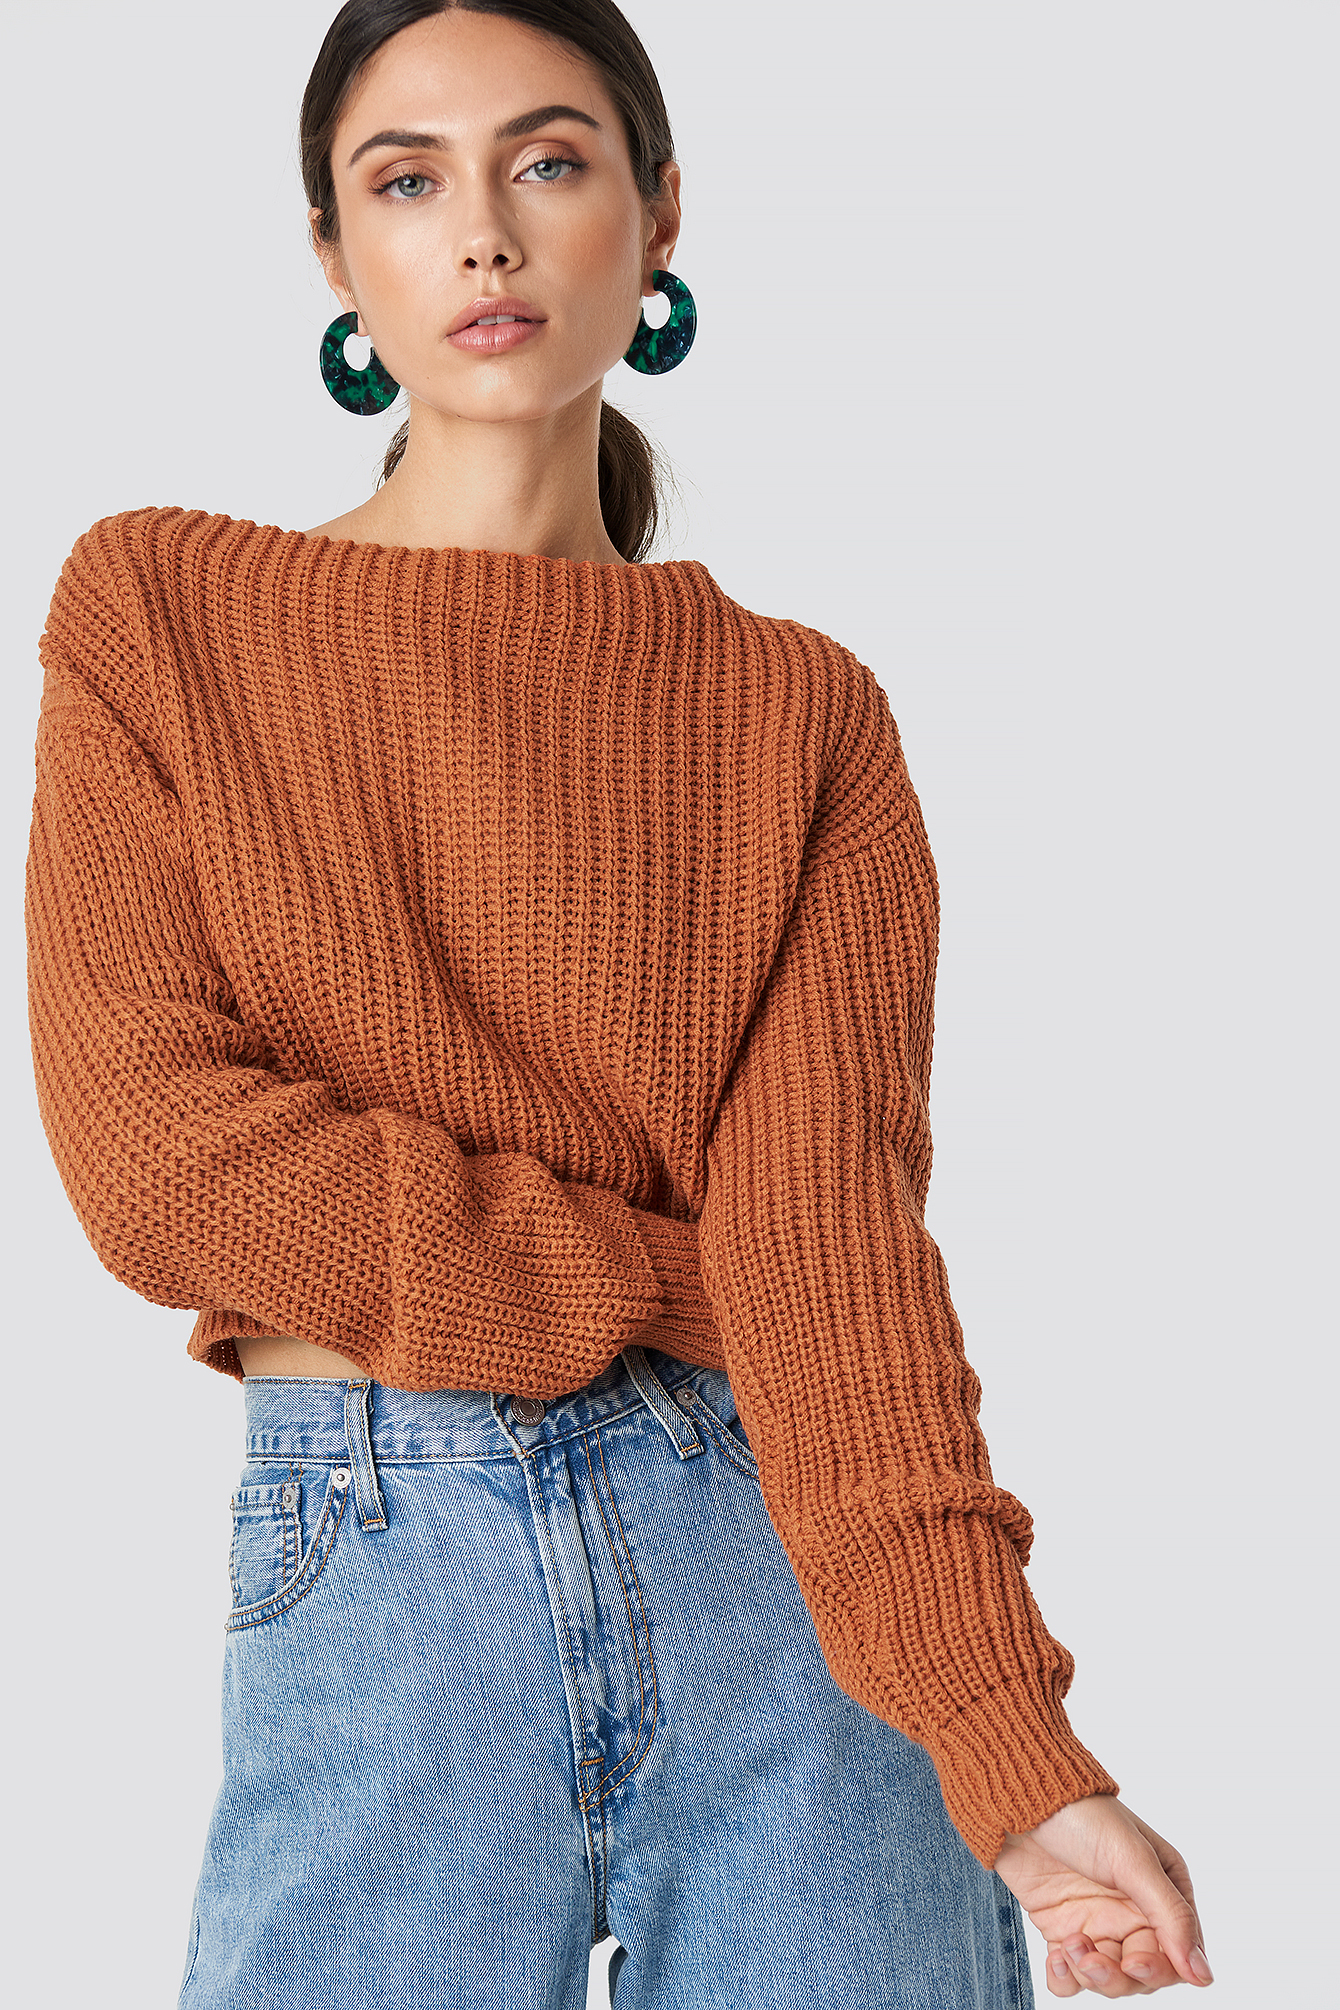 Cinnamon Knitted Sweater